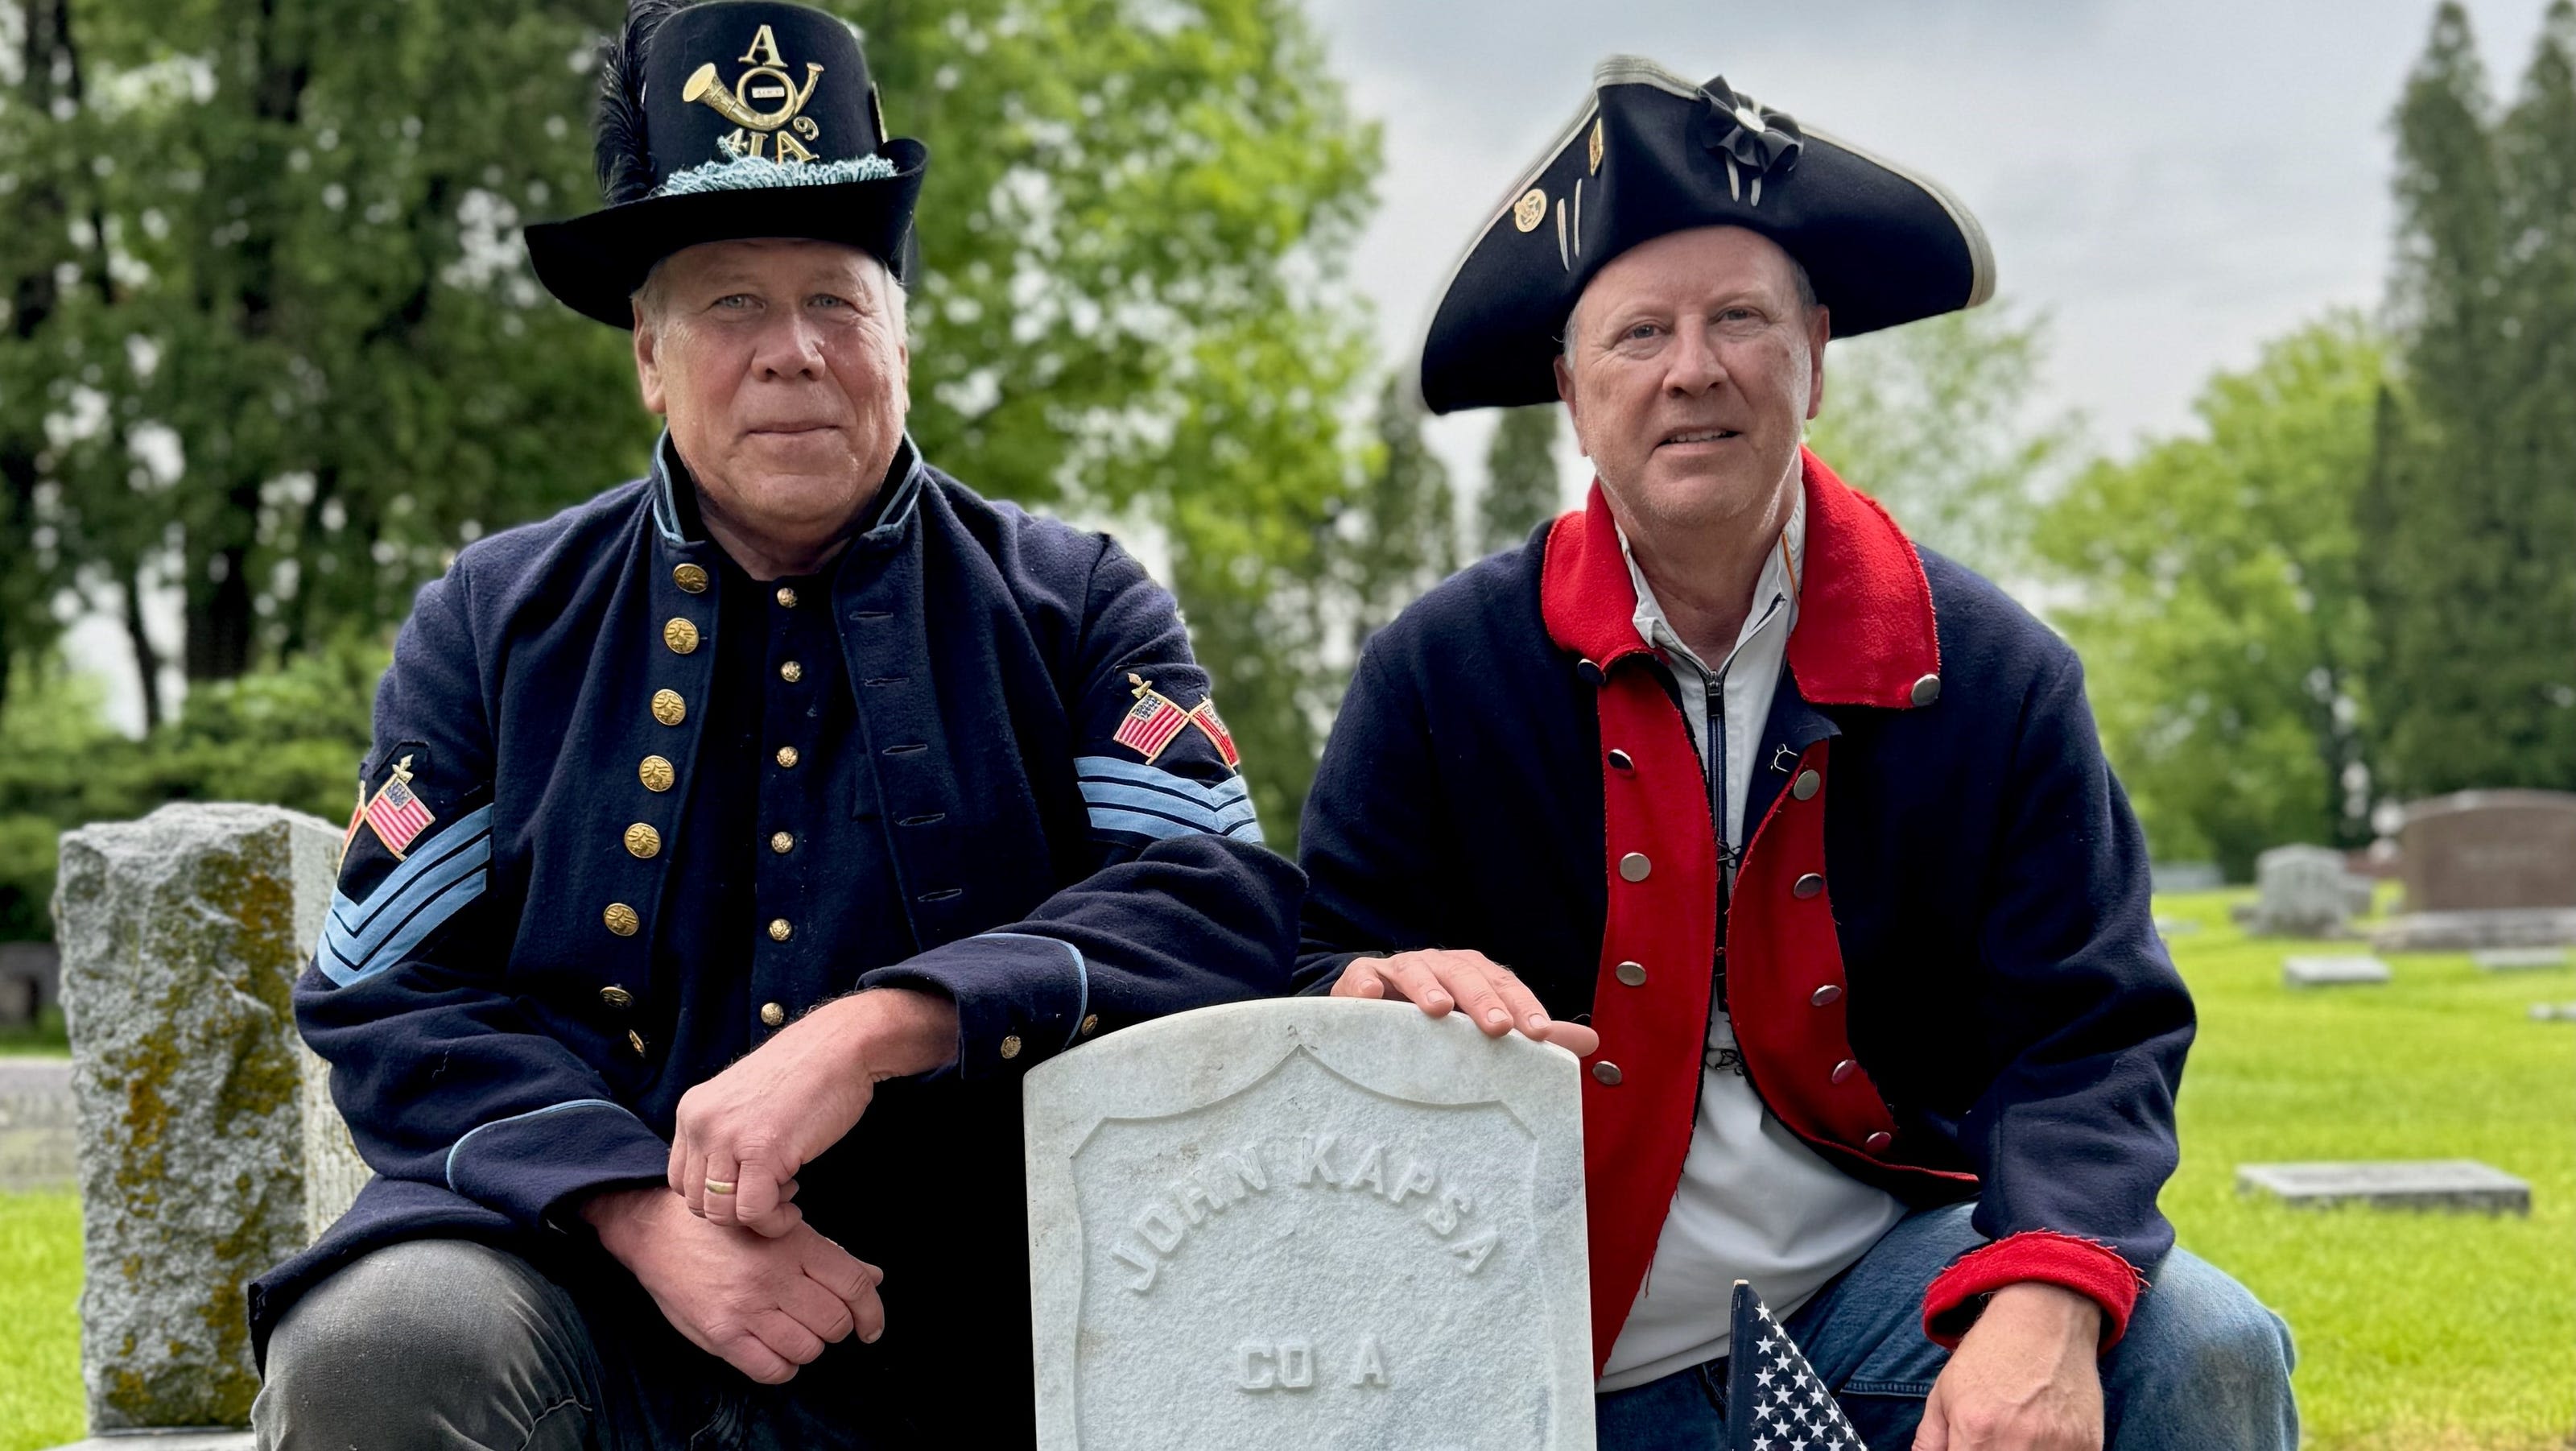 Civil War veteran John Kapsa's unmarked grave receives headstone after 105 years after death